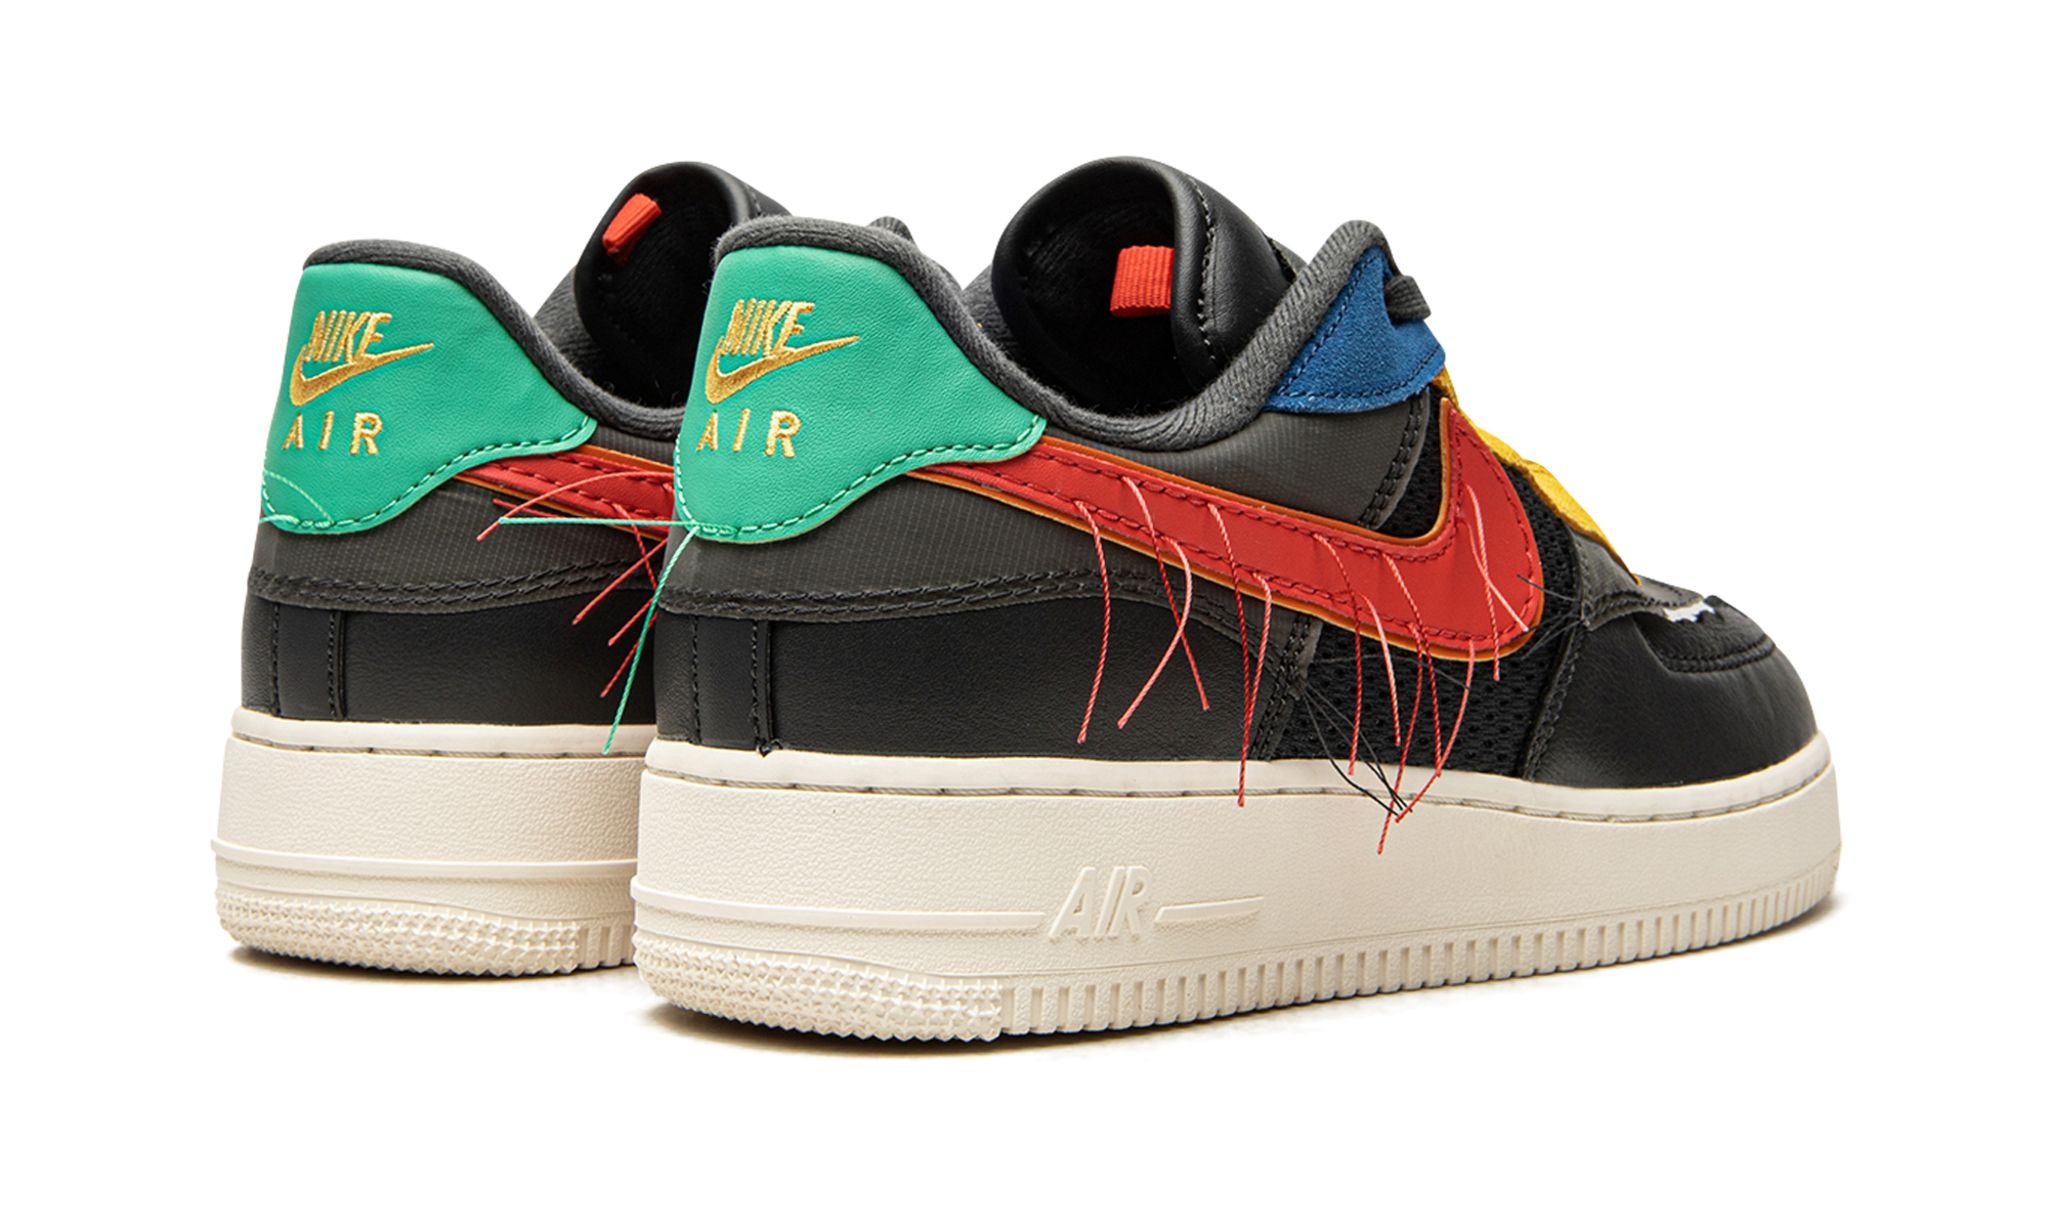 Air Force 1 Low "BHM/Black History Month 2020" - 3